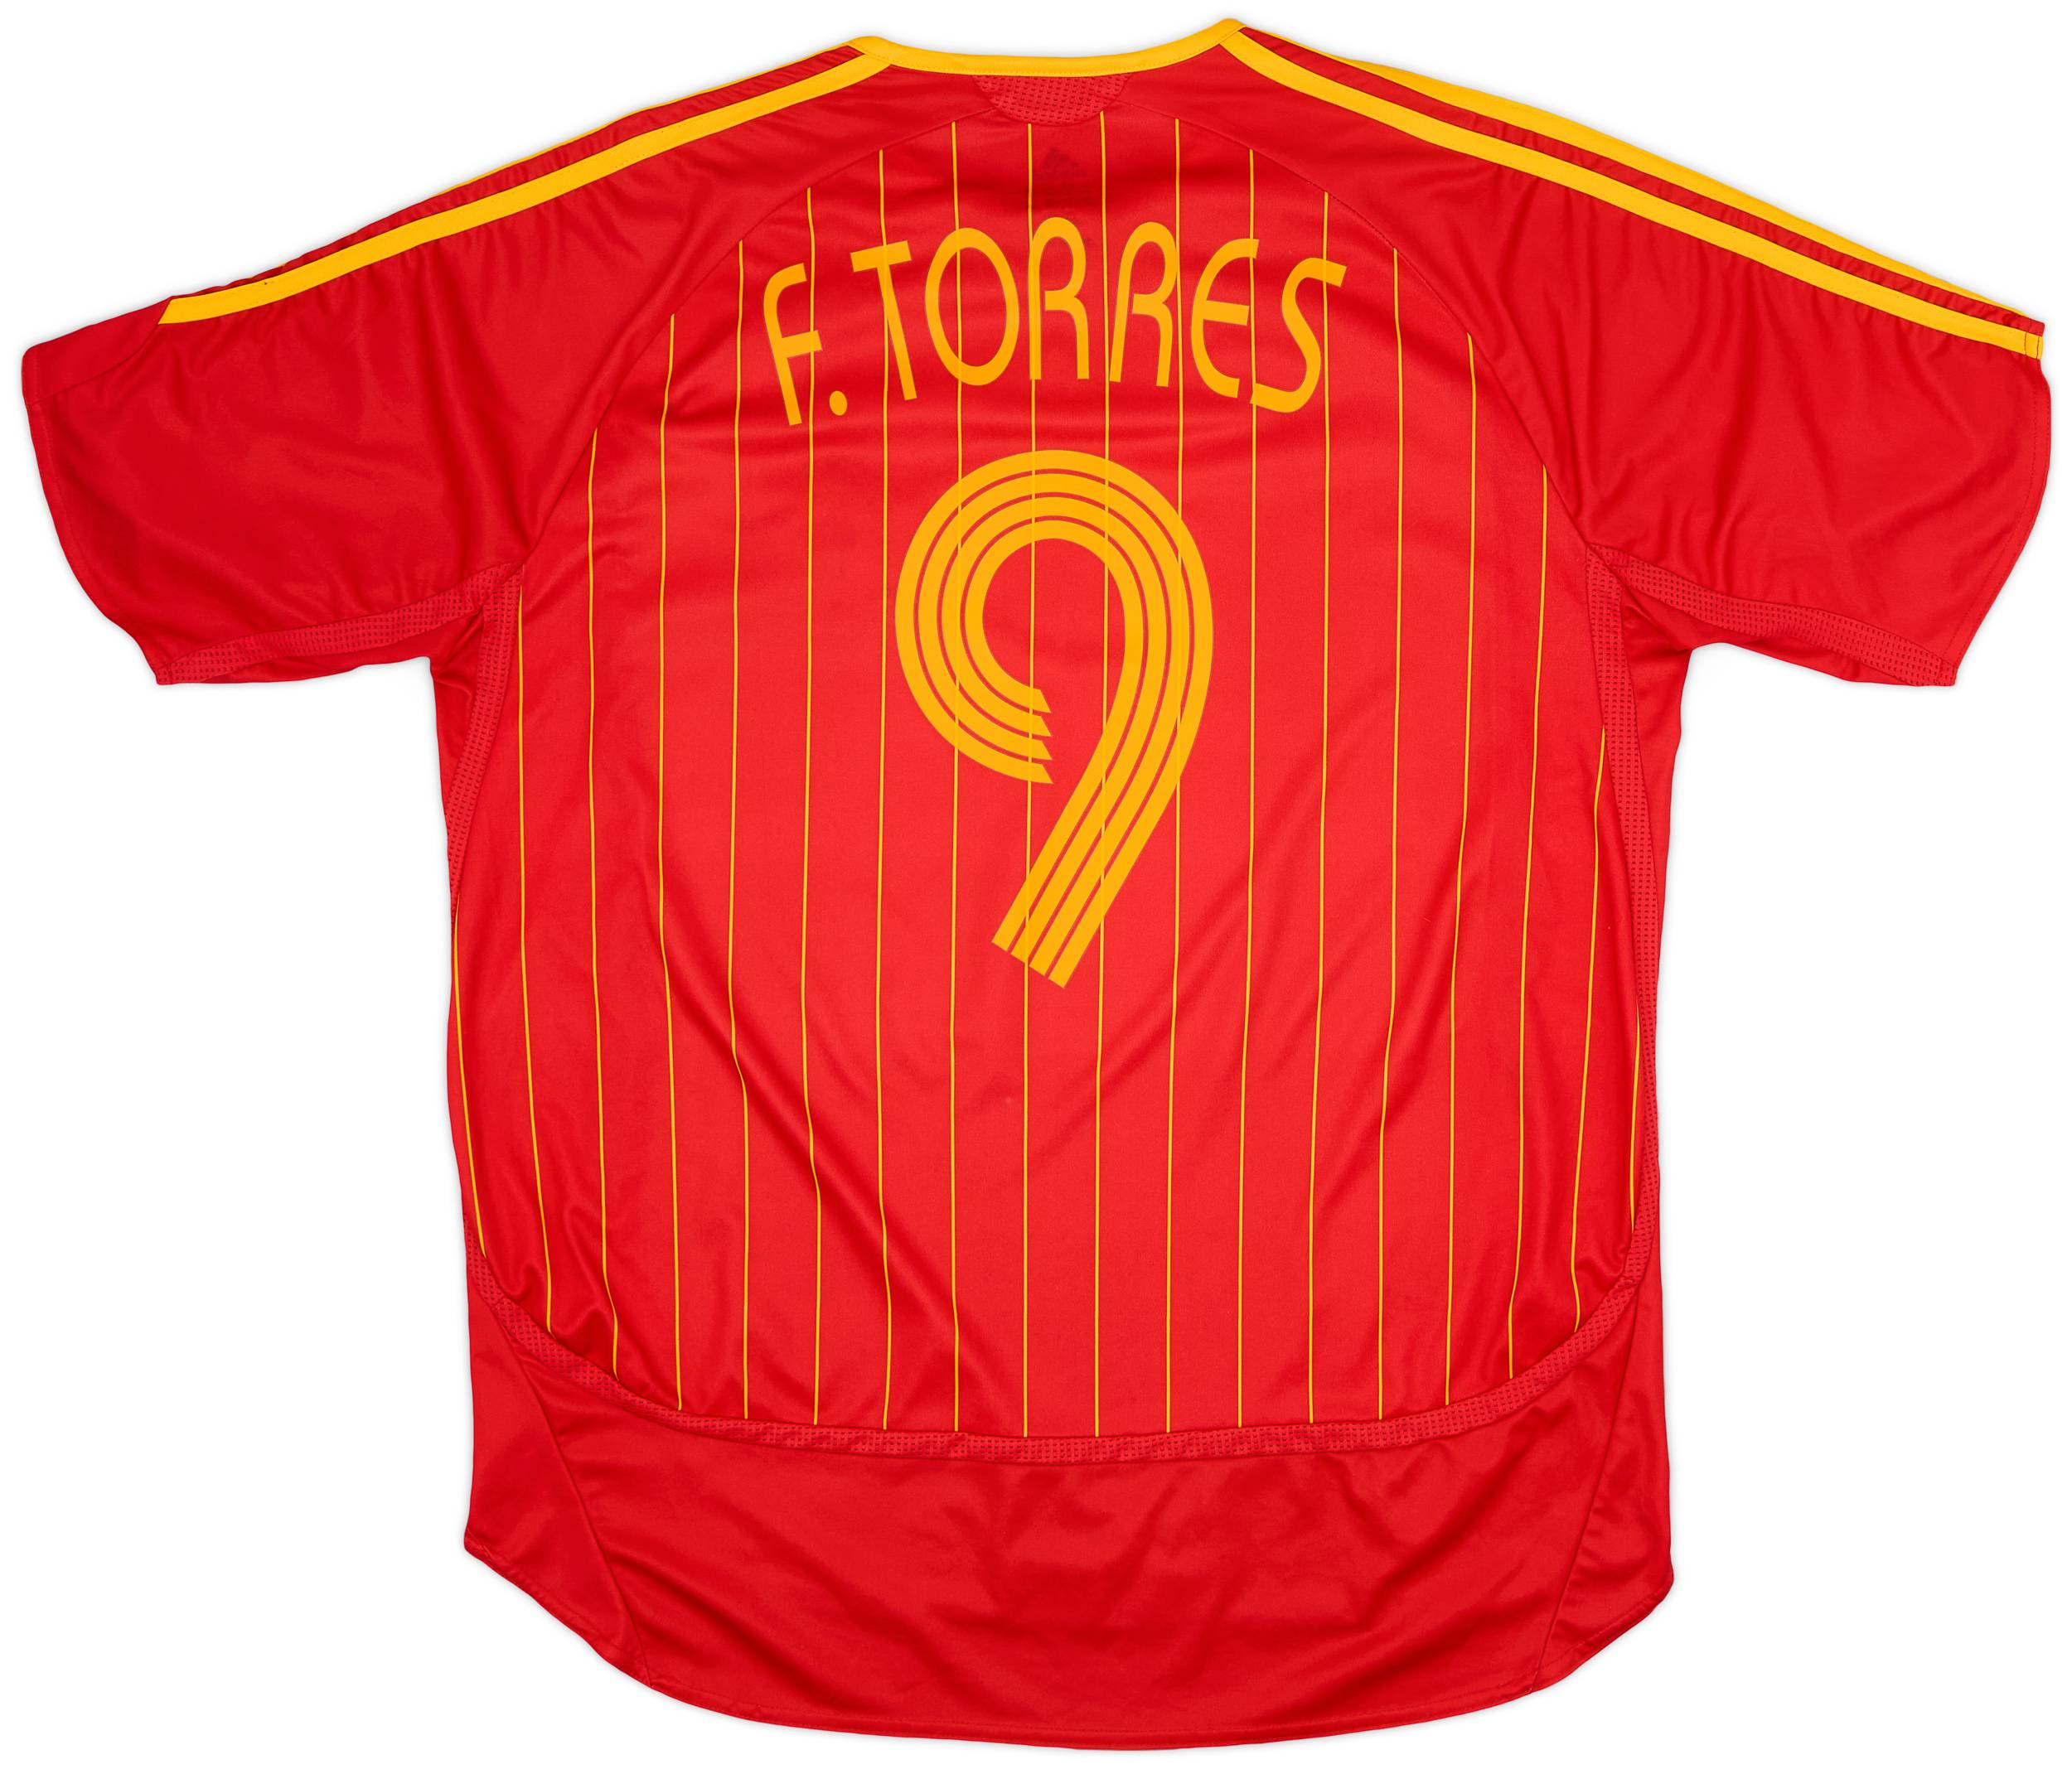 2006-08 Spain Player Issue Home Shirt F.Torres #9 - 8/10 - (XL)